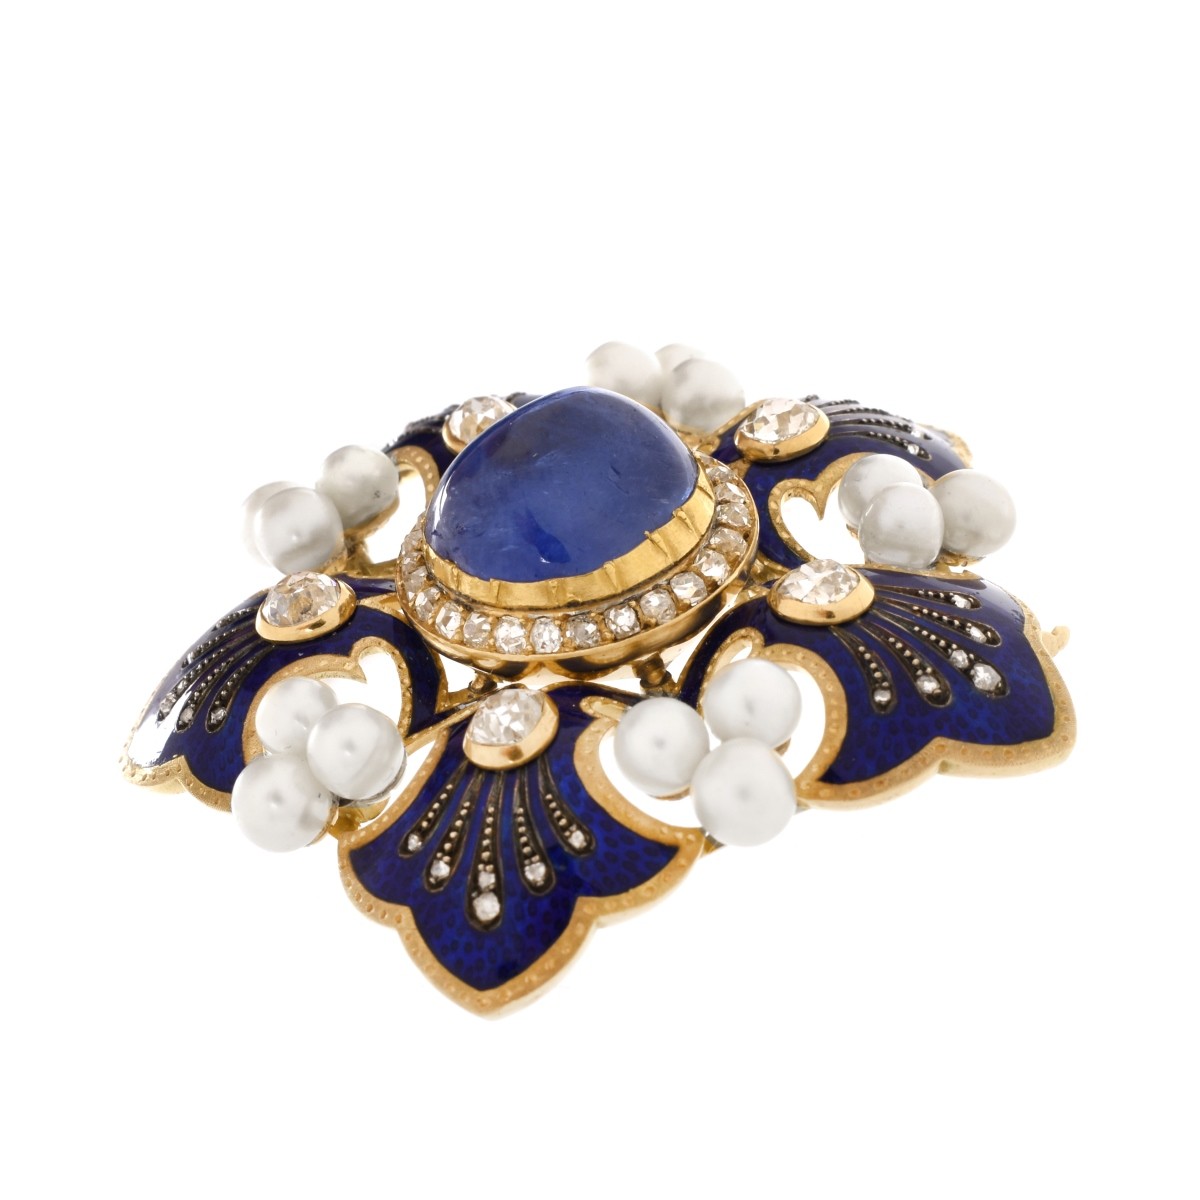 Vintage Cabochon Sapphire and 18K Brooch